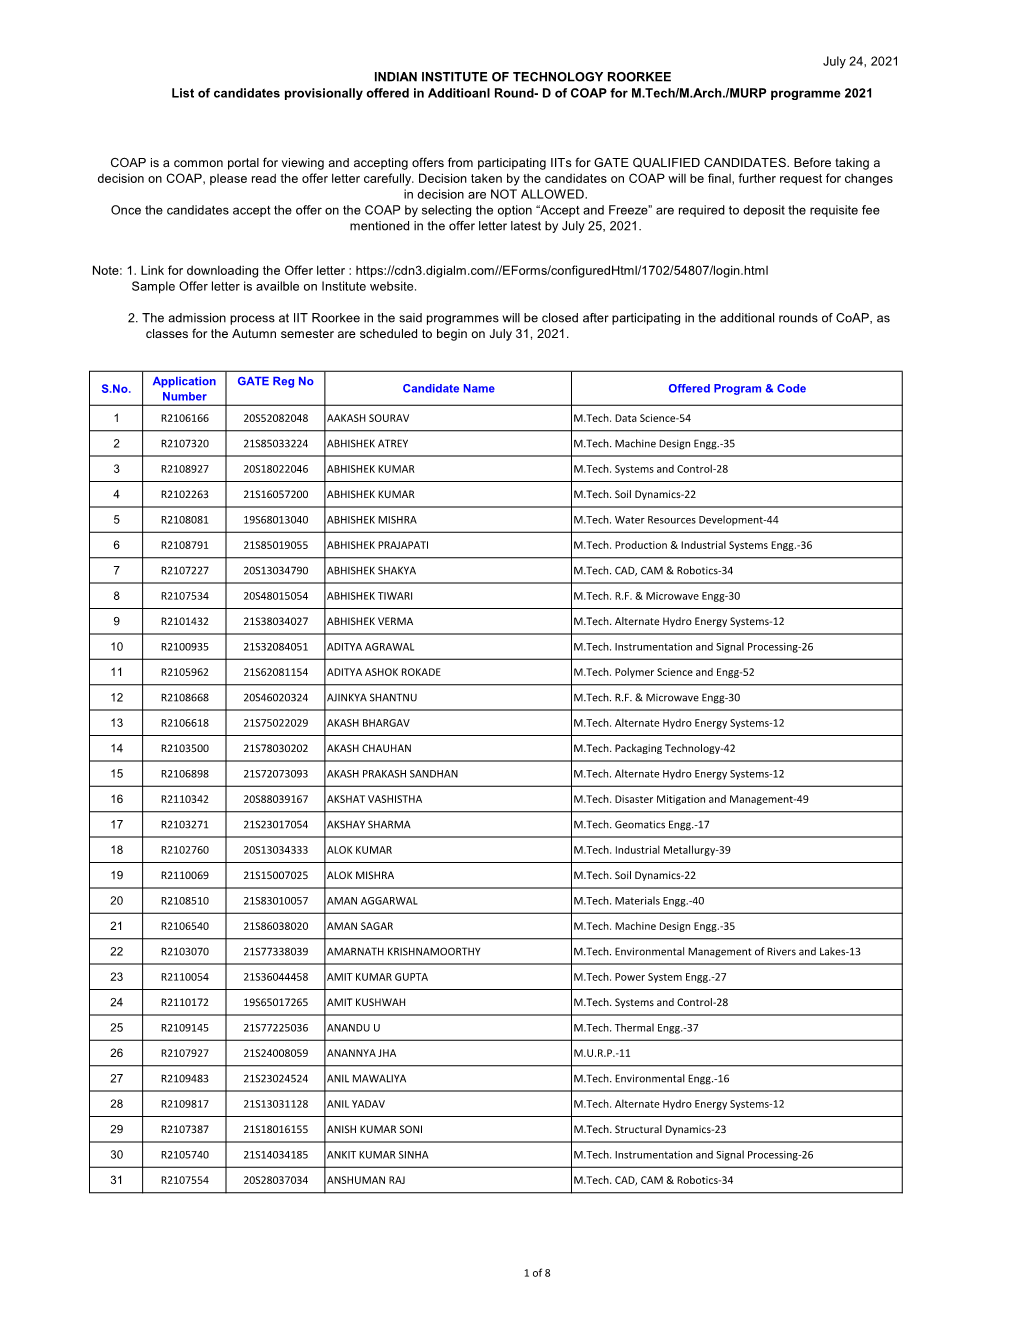 July 24, 2021 INDIAN INSTITUTE of TECHNOLOGY ROORKEE List of Candidates Provisionally Offered in Additioanl Round- D of COAP for M.Tech/M.Arch./MURP Programme 2021